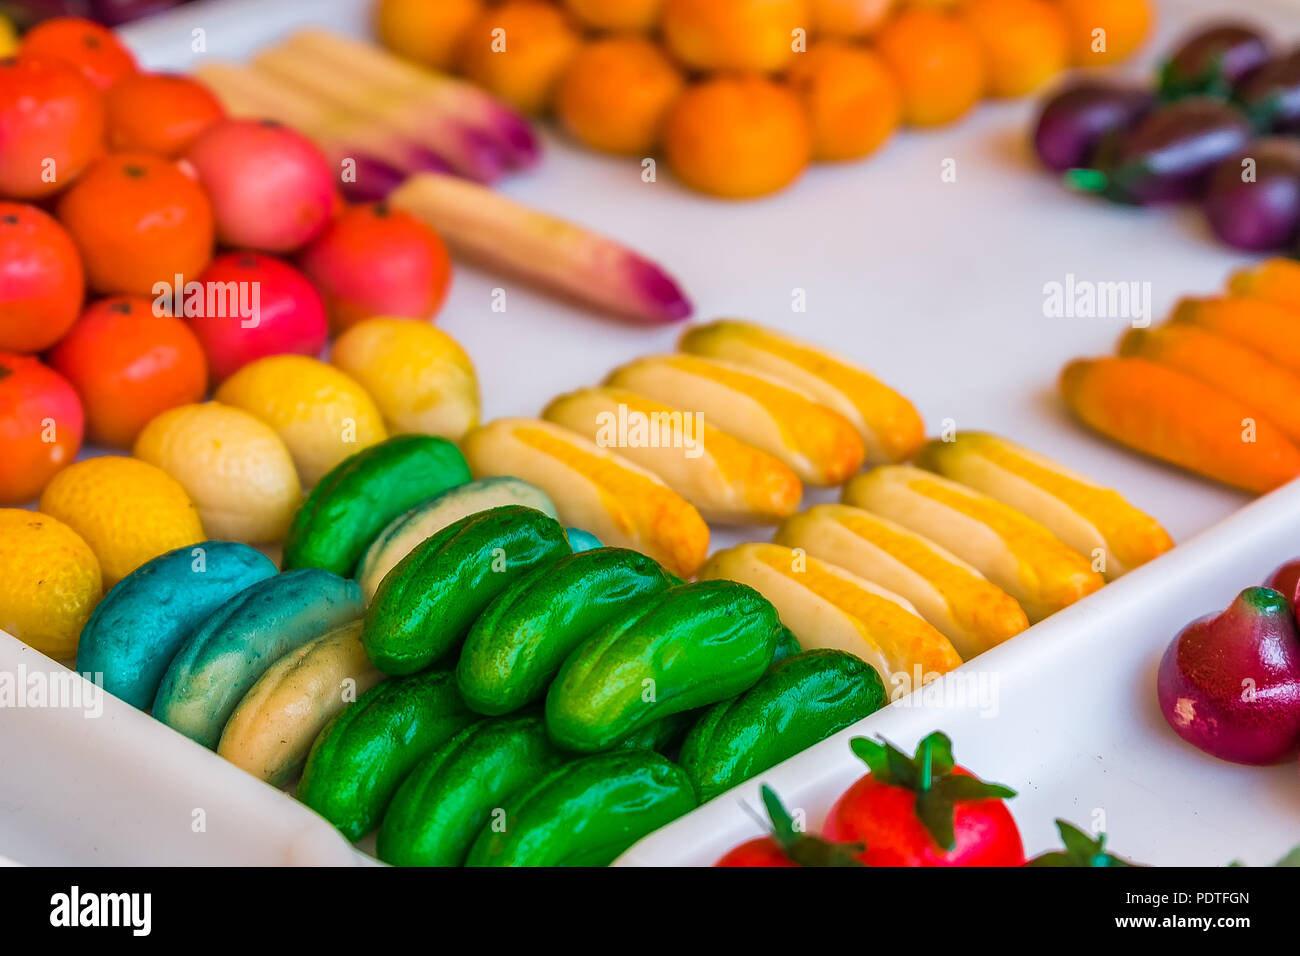 Colorful marzipan or almond paste candy made to look like fruits and vegetables and a market in Nice, France. Stock Photo